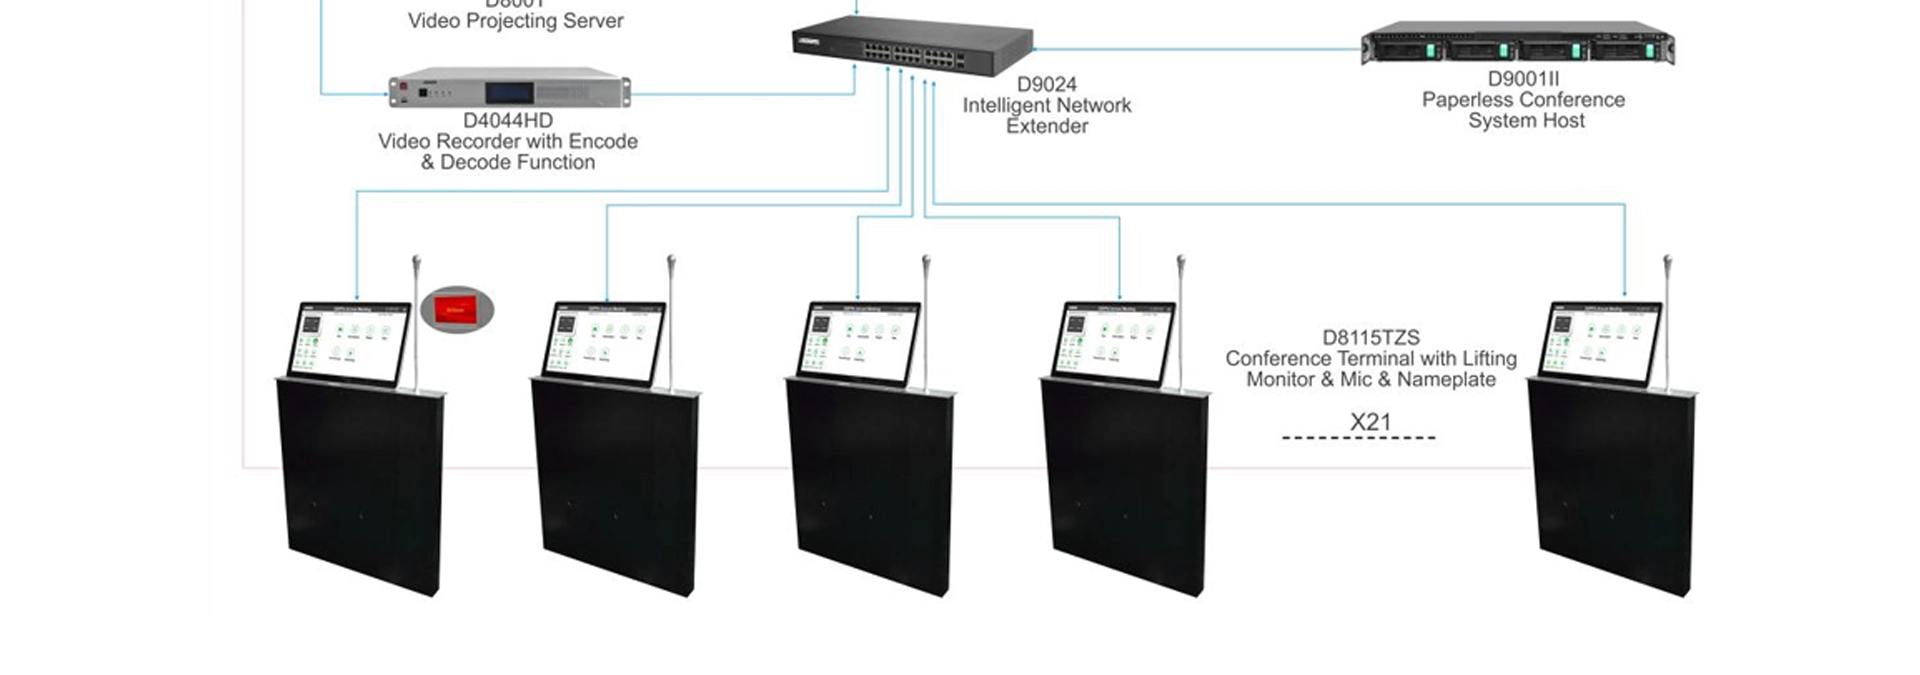 Paperless Conference System Streaming Media Server